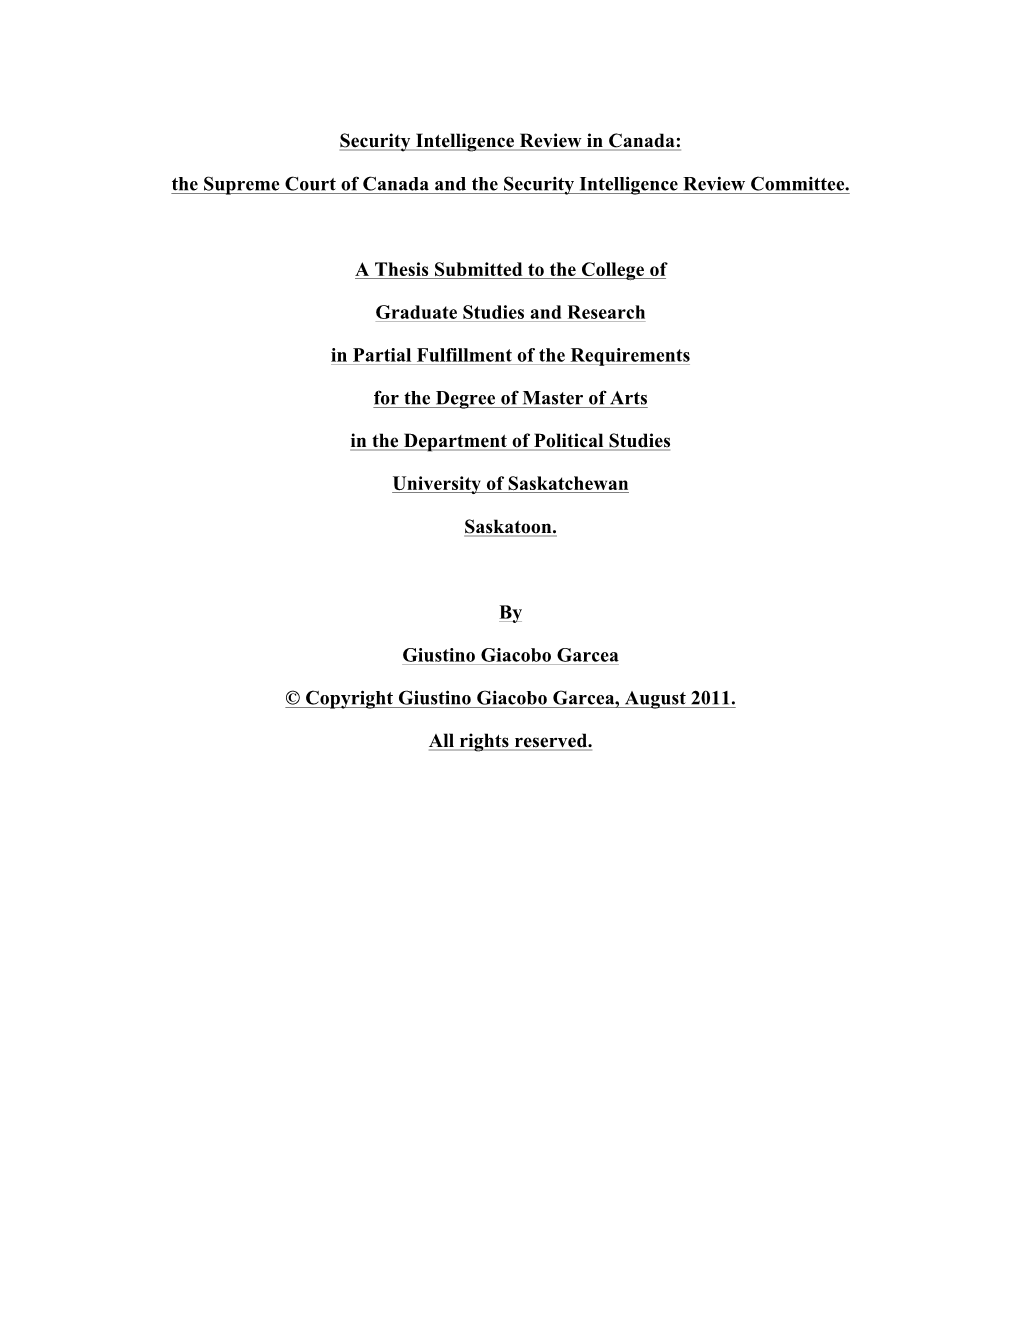 Security Intelligence Review in Canada: the Supreme Court of Canada and the Security Intelligence Review Committee